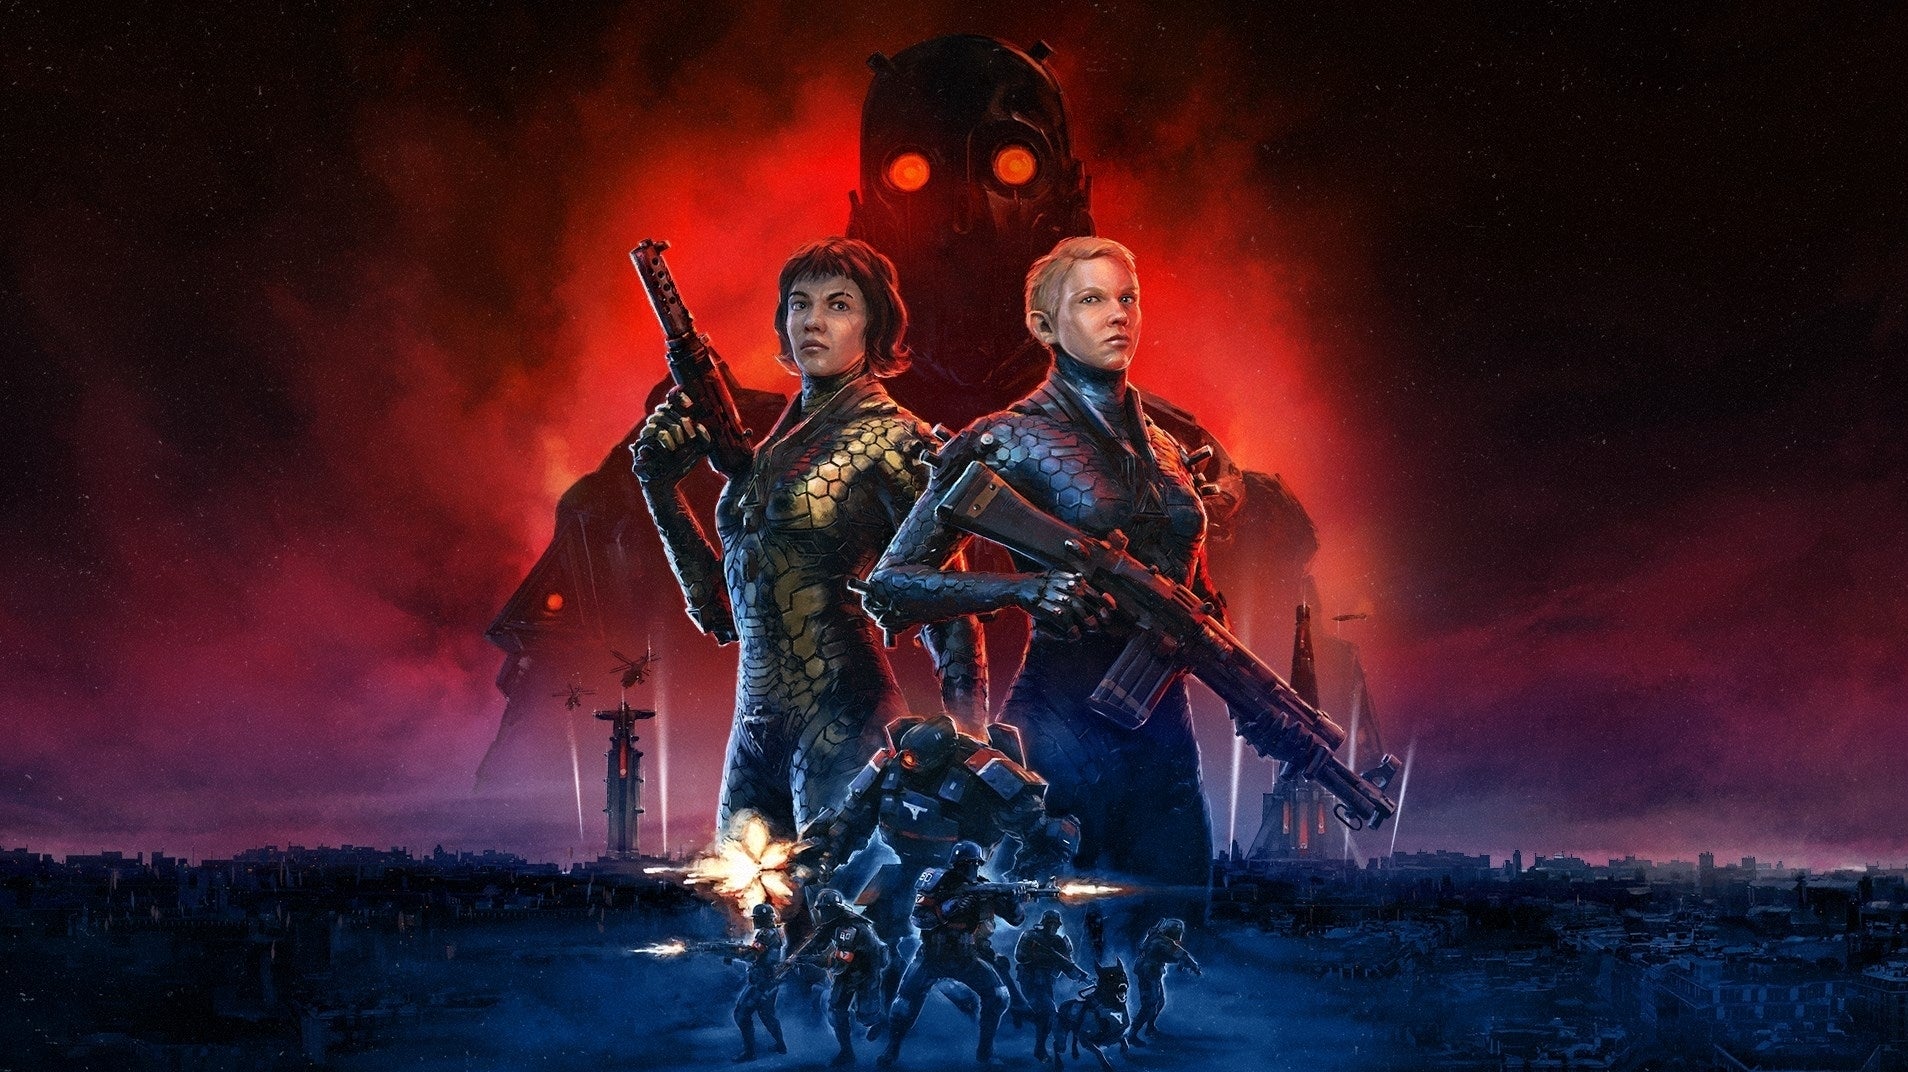 Image for Wolfenstein: Youngblood review - slender, buggy, but sincerely enjoyable co-op mayhem